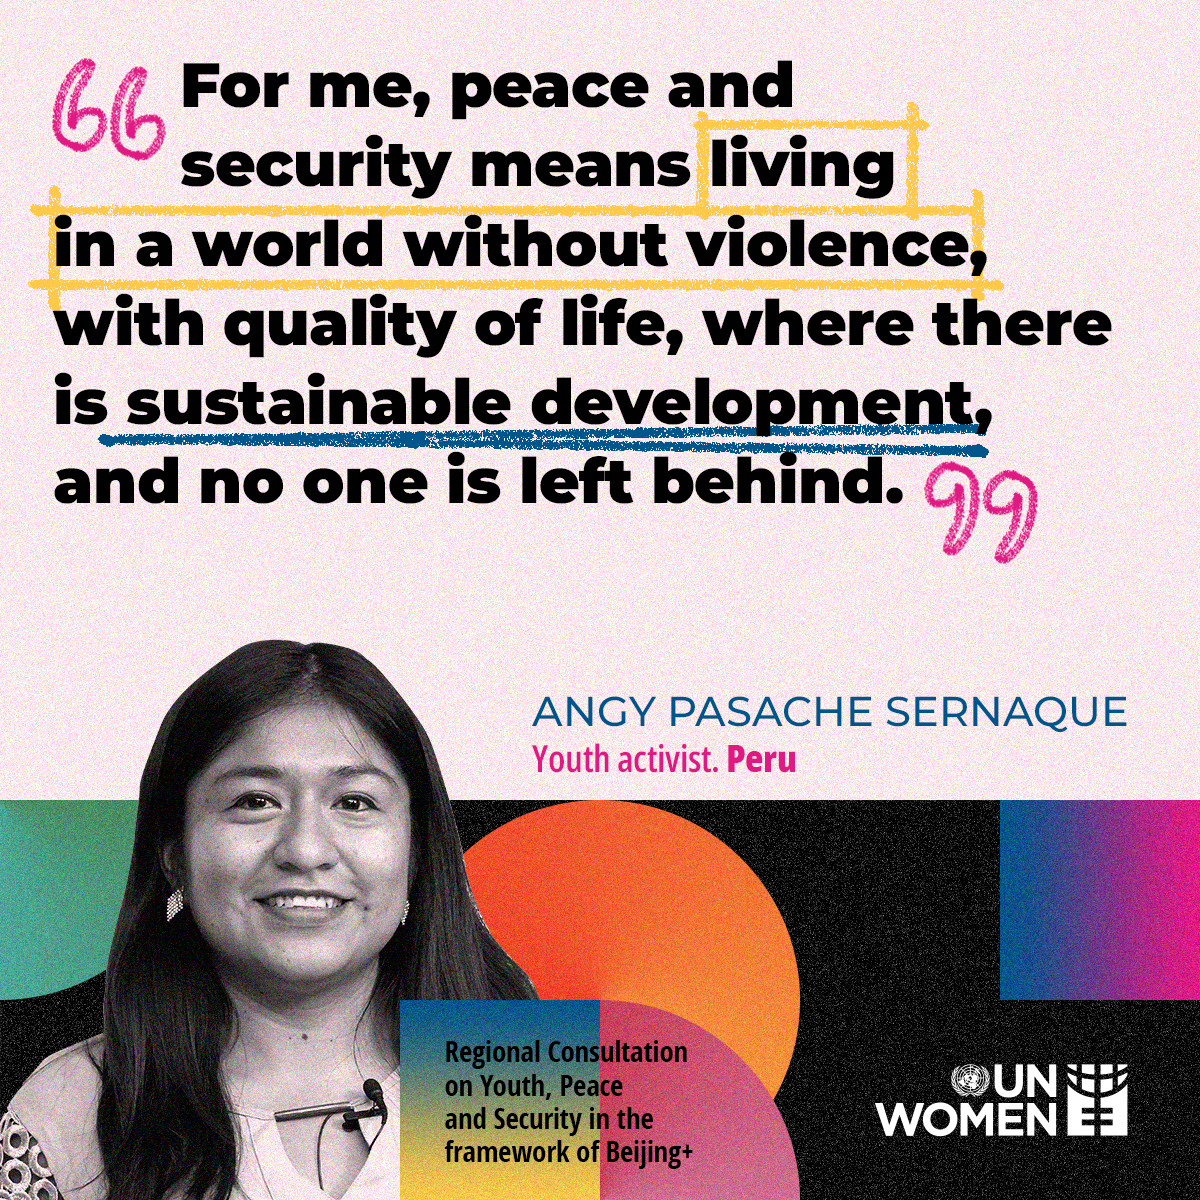 EN-PeaceMonth-Youth-AngyPasacheSernaque-Peru.png